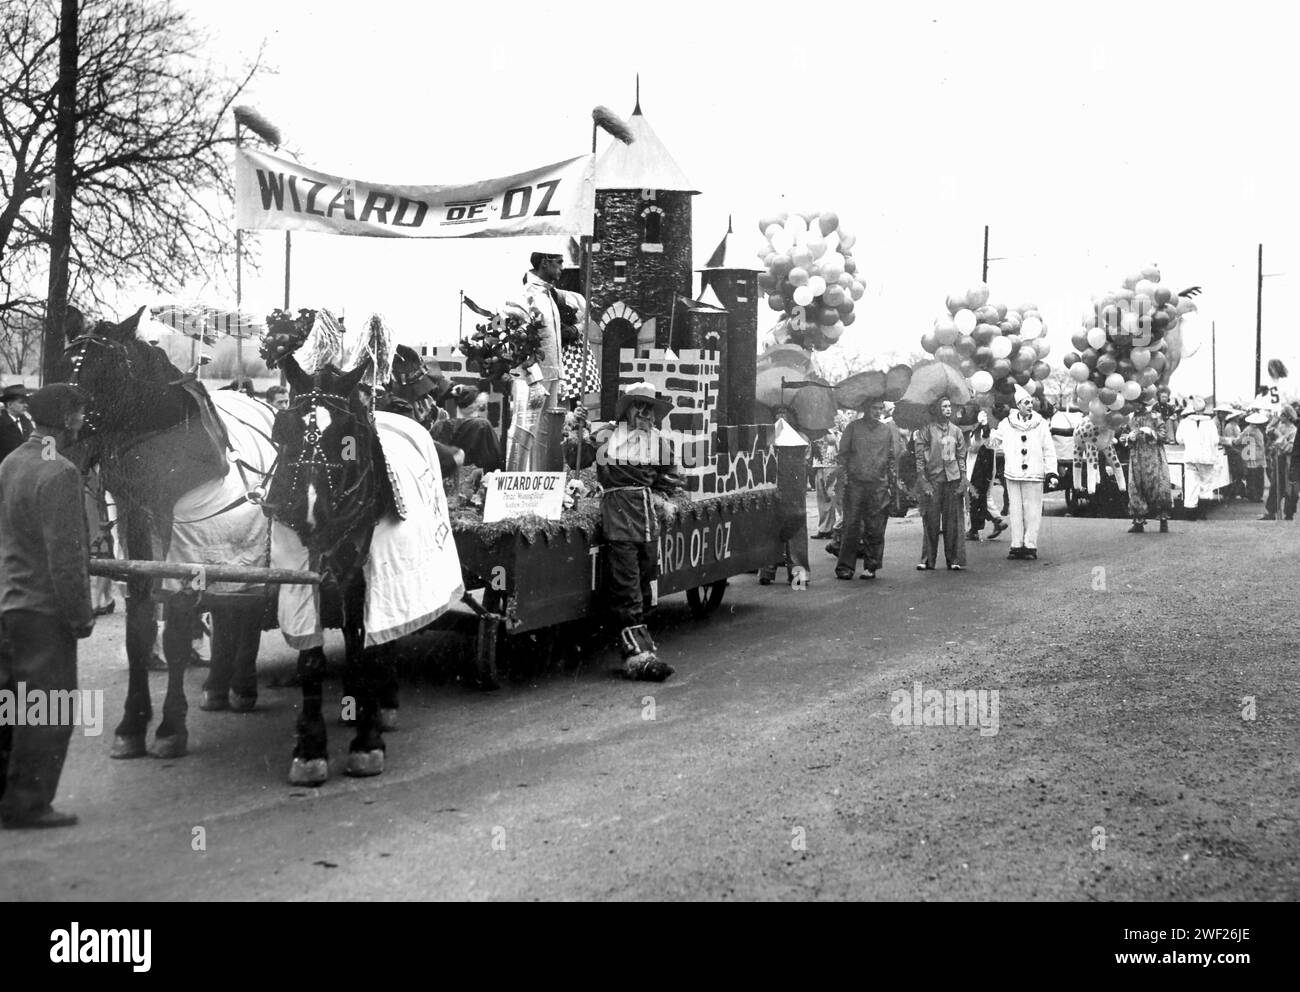 A parade featuring a float of the Wizard of Oz, ca. 1940. Stock Photo